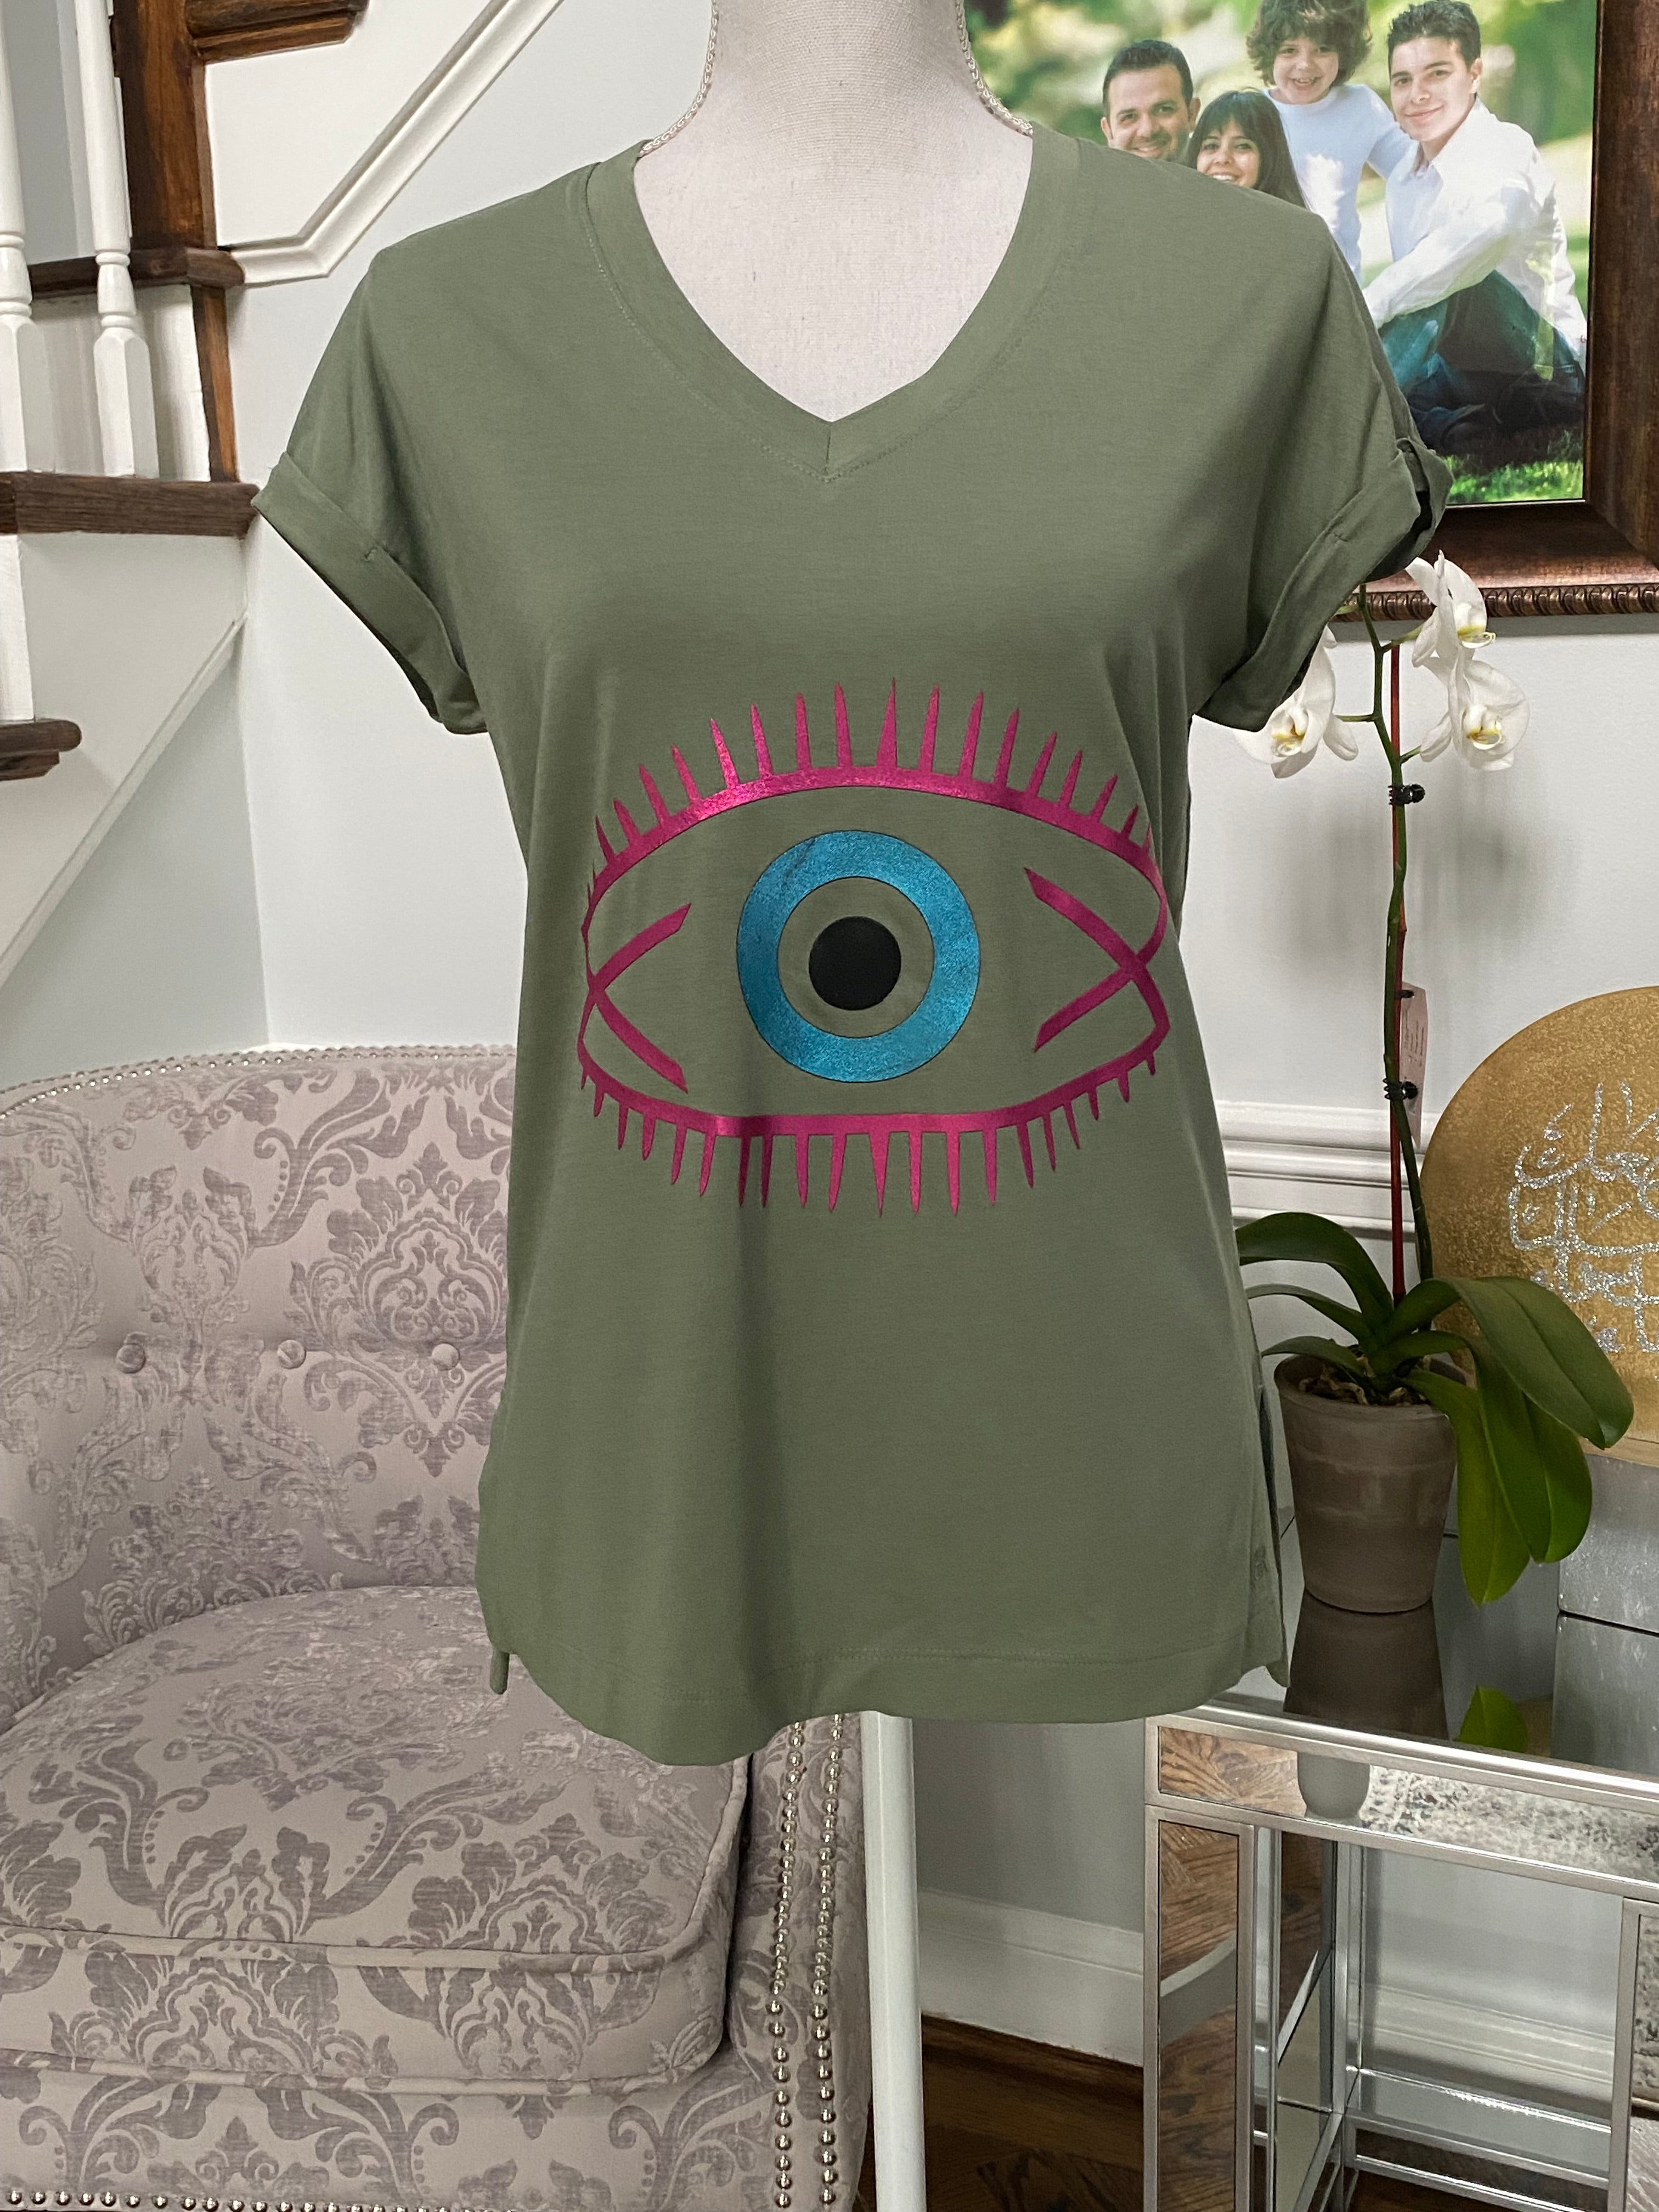 Army Green V-neck top with the eye design